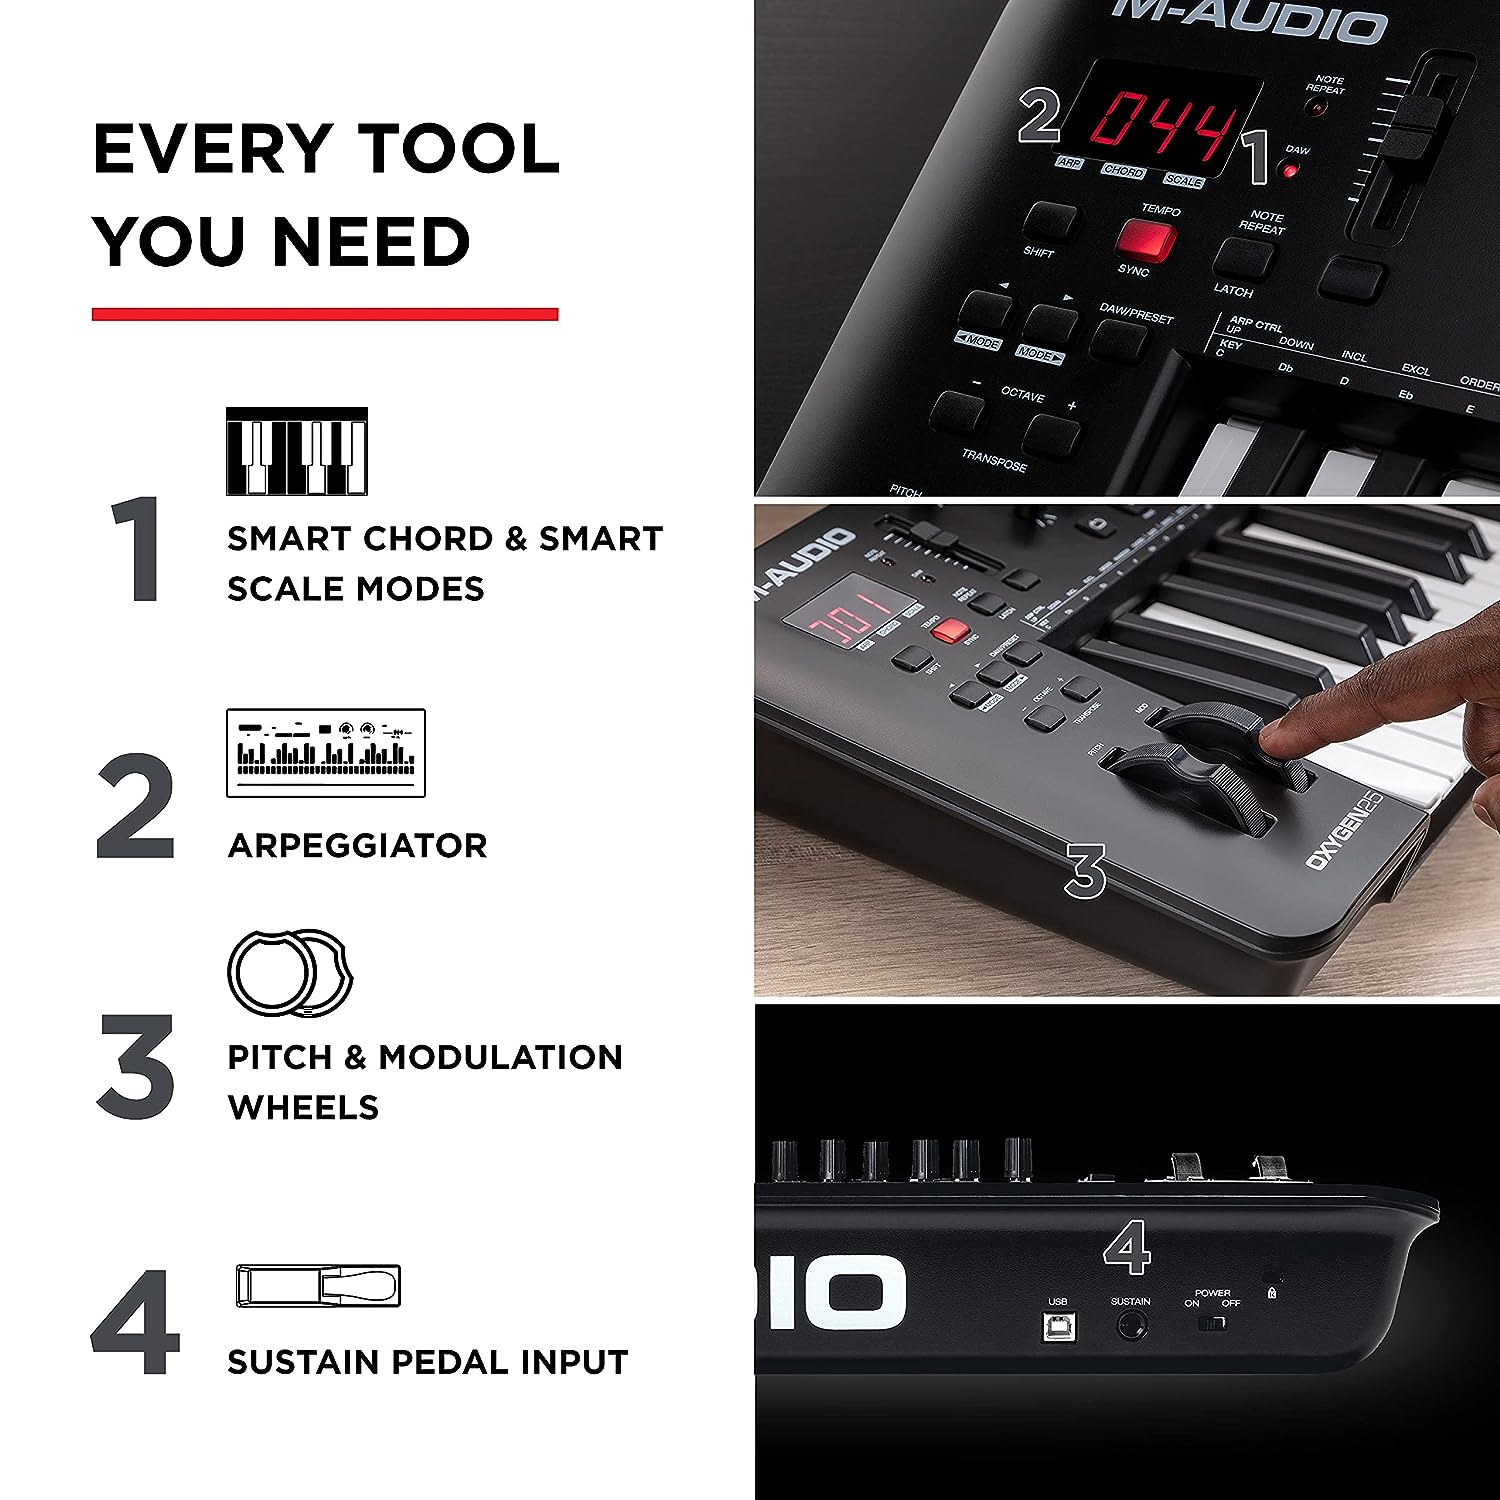 M-Audio Oxygen 25 (MKV) USB MIDI Controller with Smart Controls and Auto-Mapping